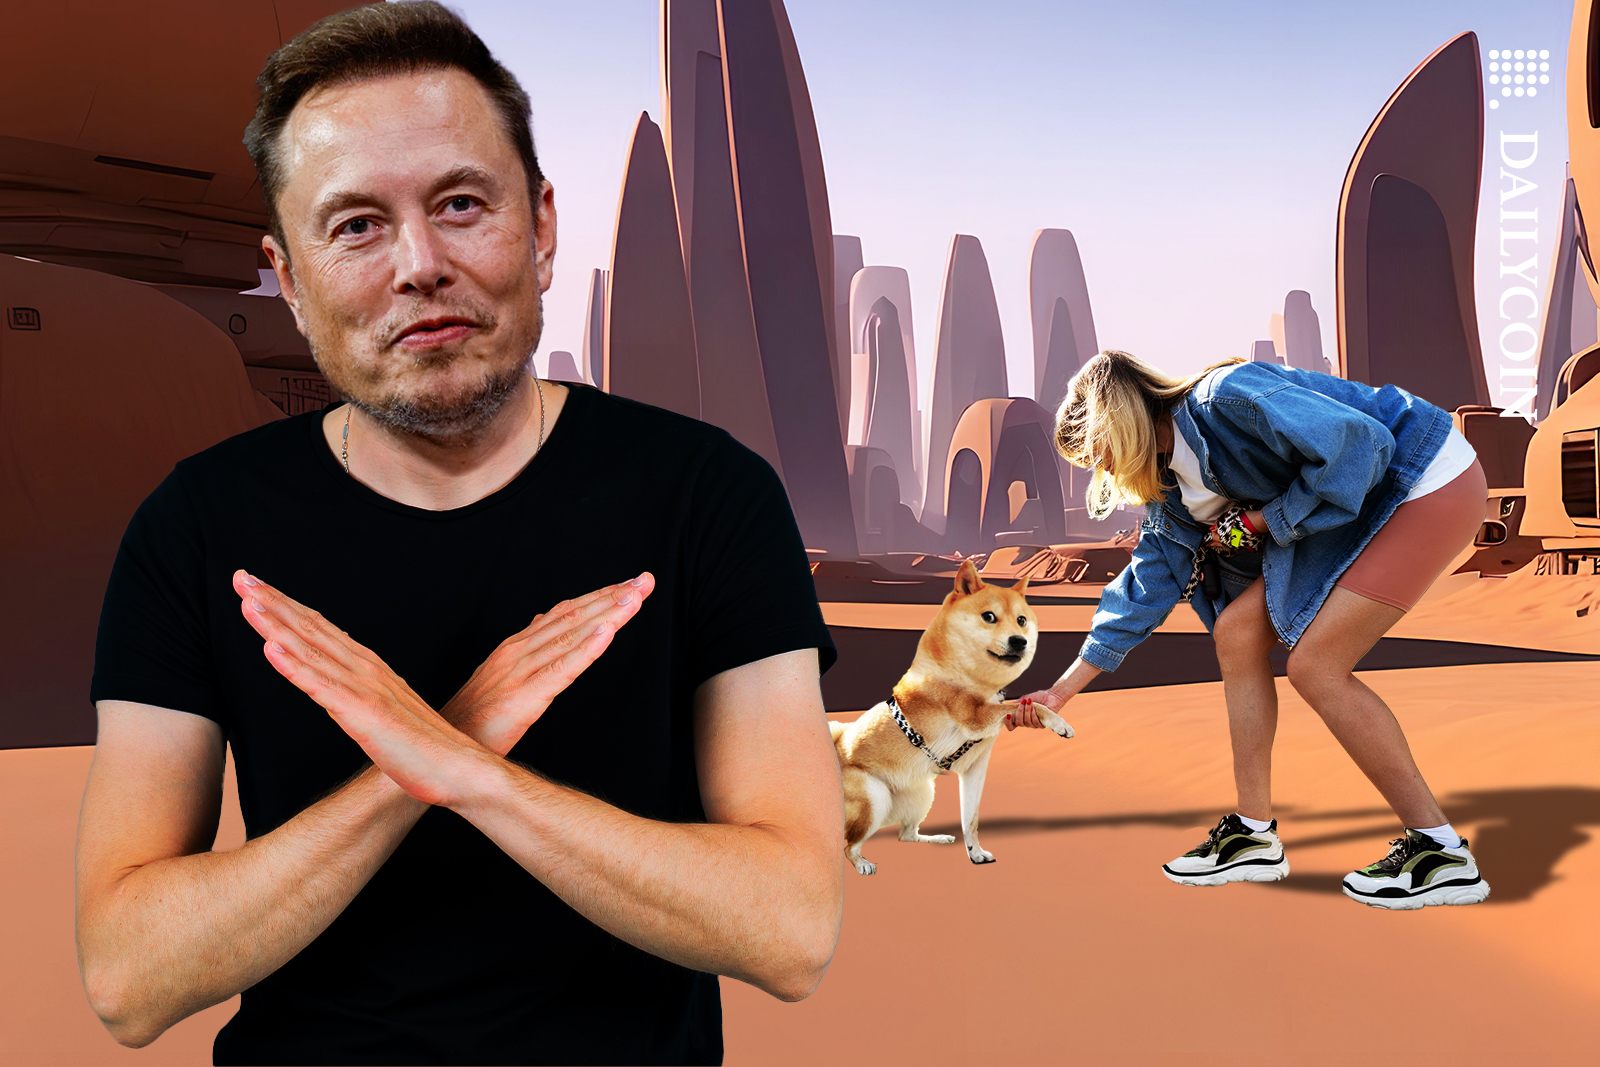 Doge meeting his fans in a futuristic land. Elon musk showing X sign.